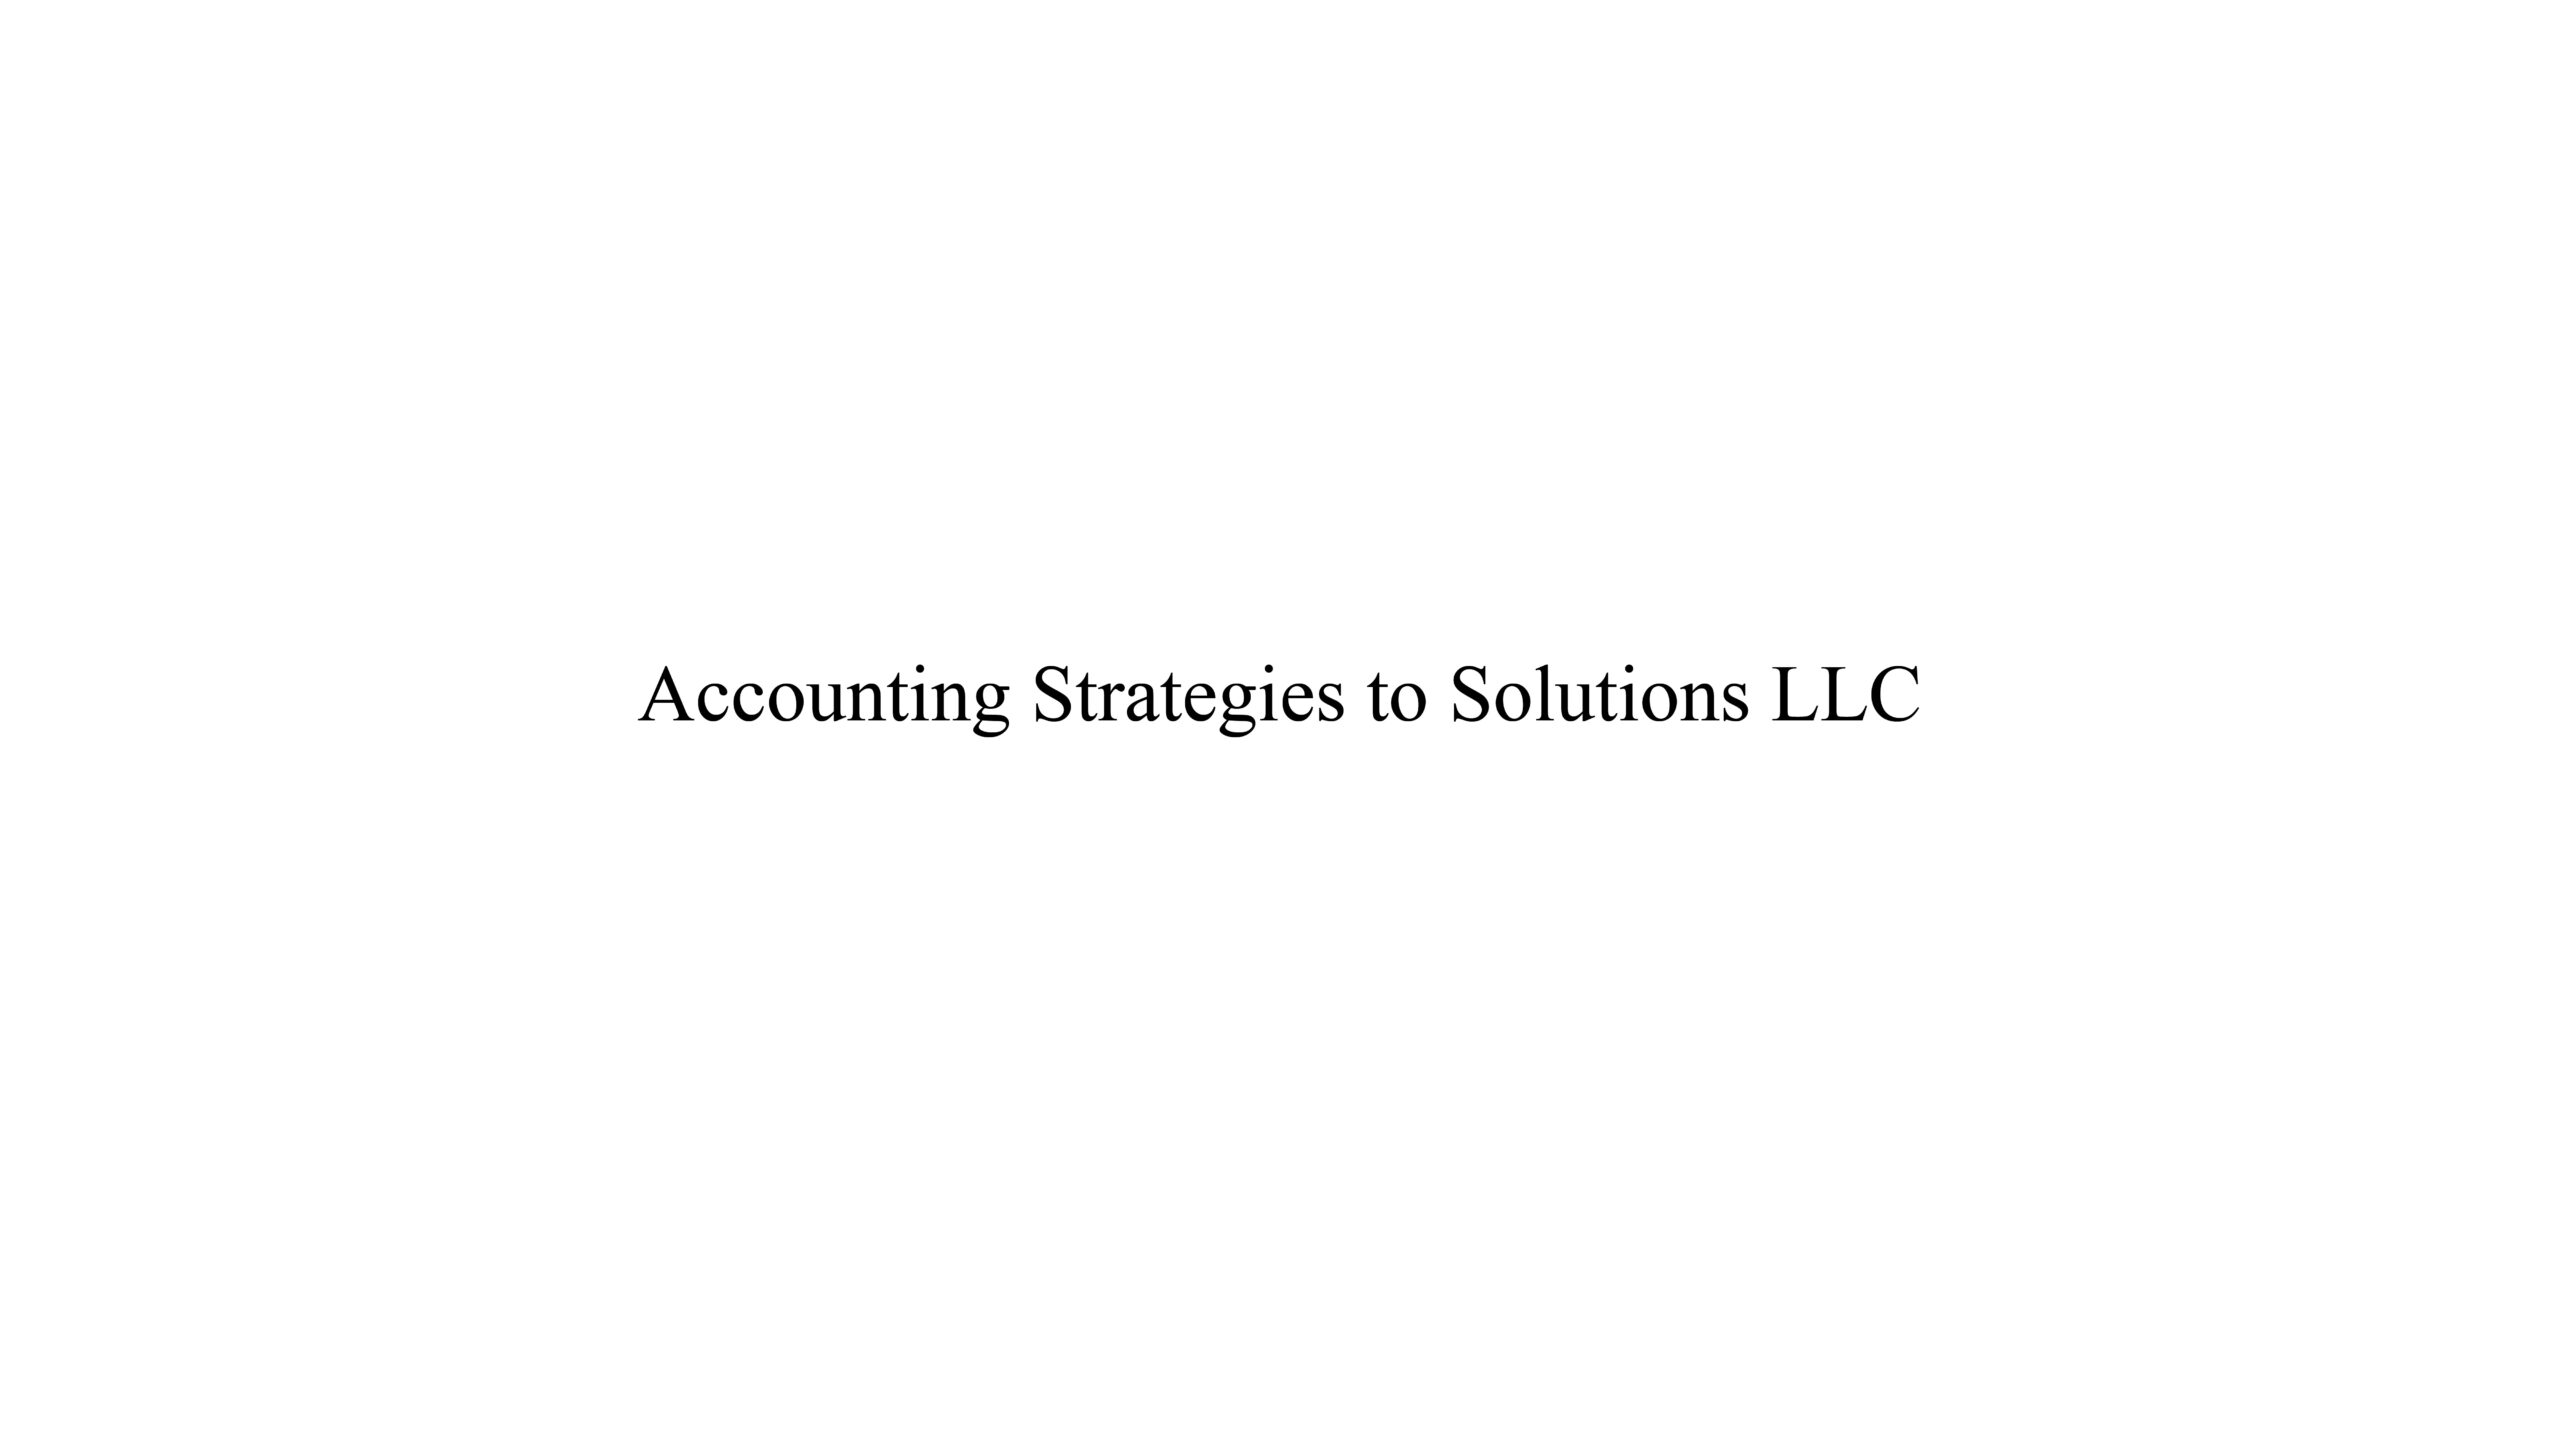 Accounting Strategies to Solutions-01-01